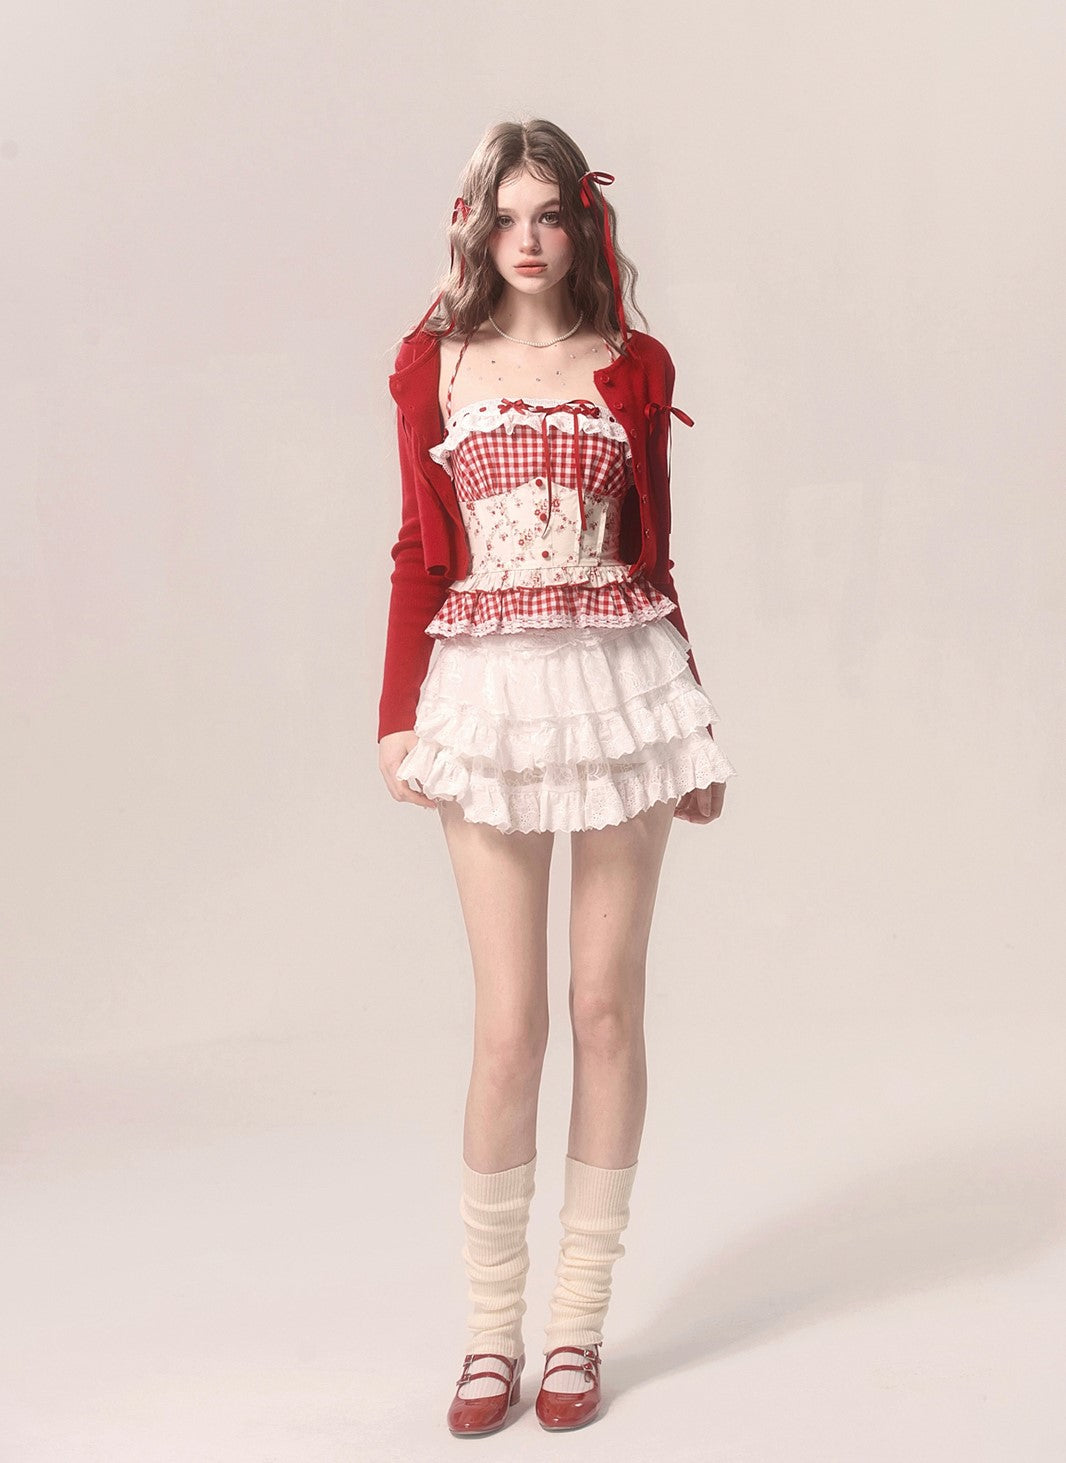 Strawberry Cake Red Plaid Lace Camisole DIA0068